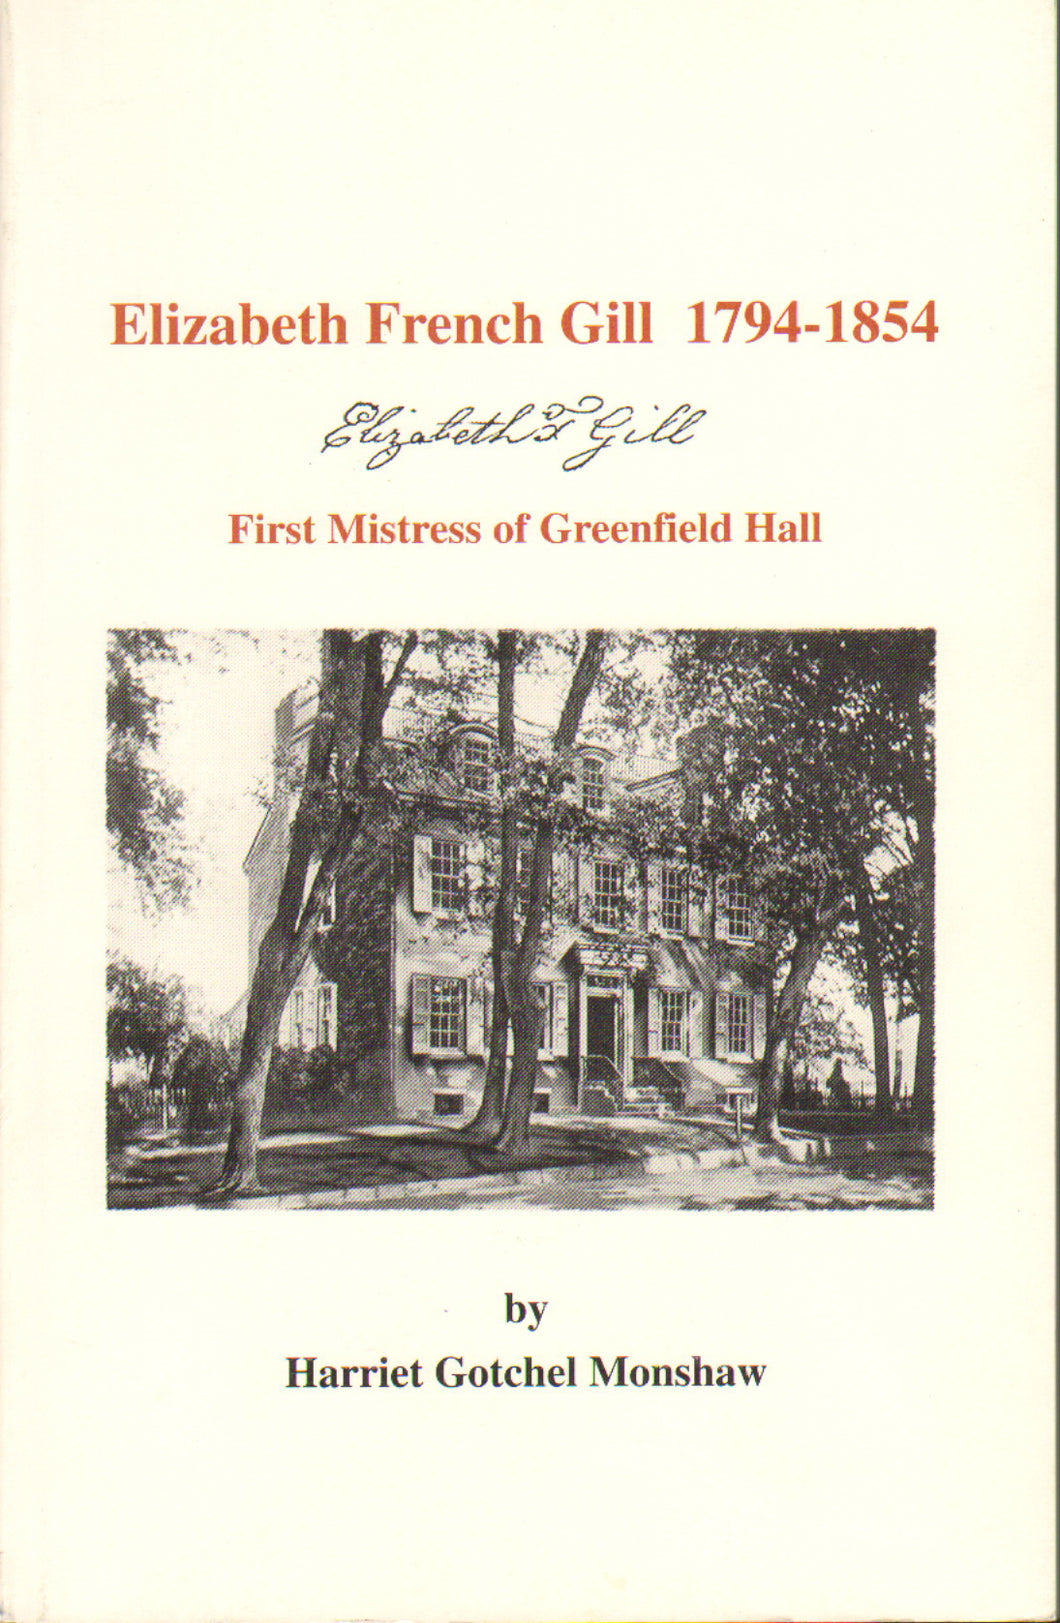 Elizabeth French Gill, 1794-1854: First Mistress of Greenfield Hall